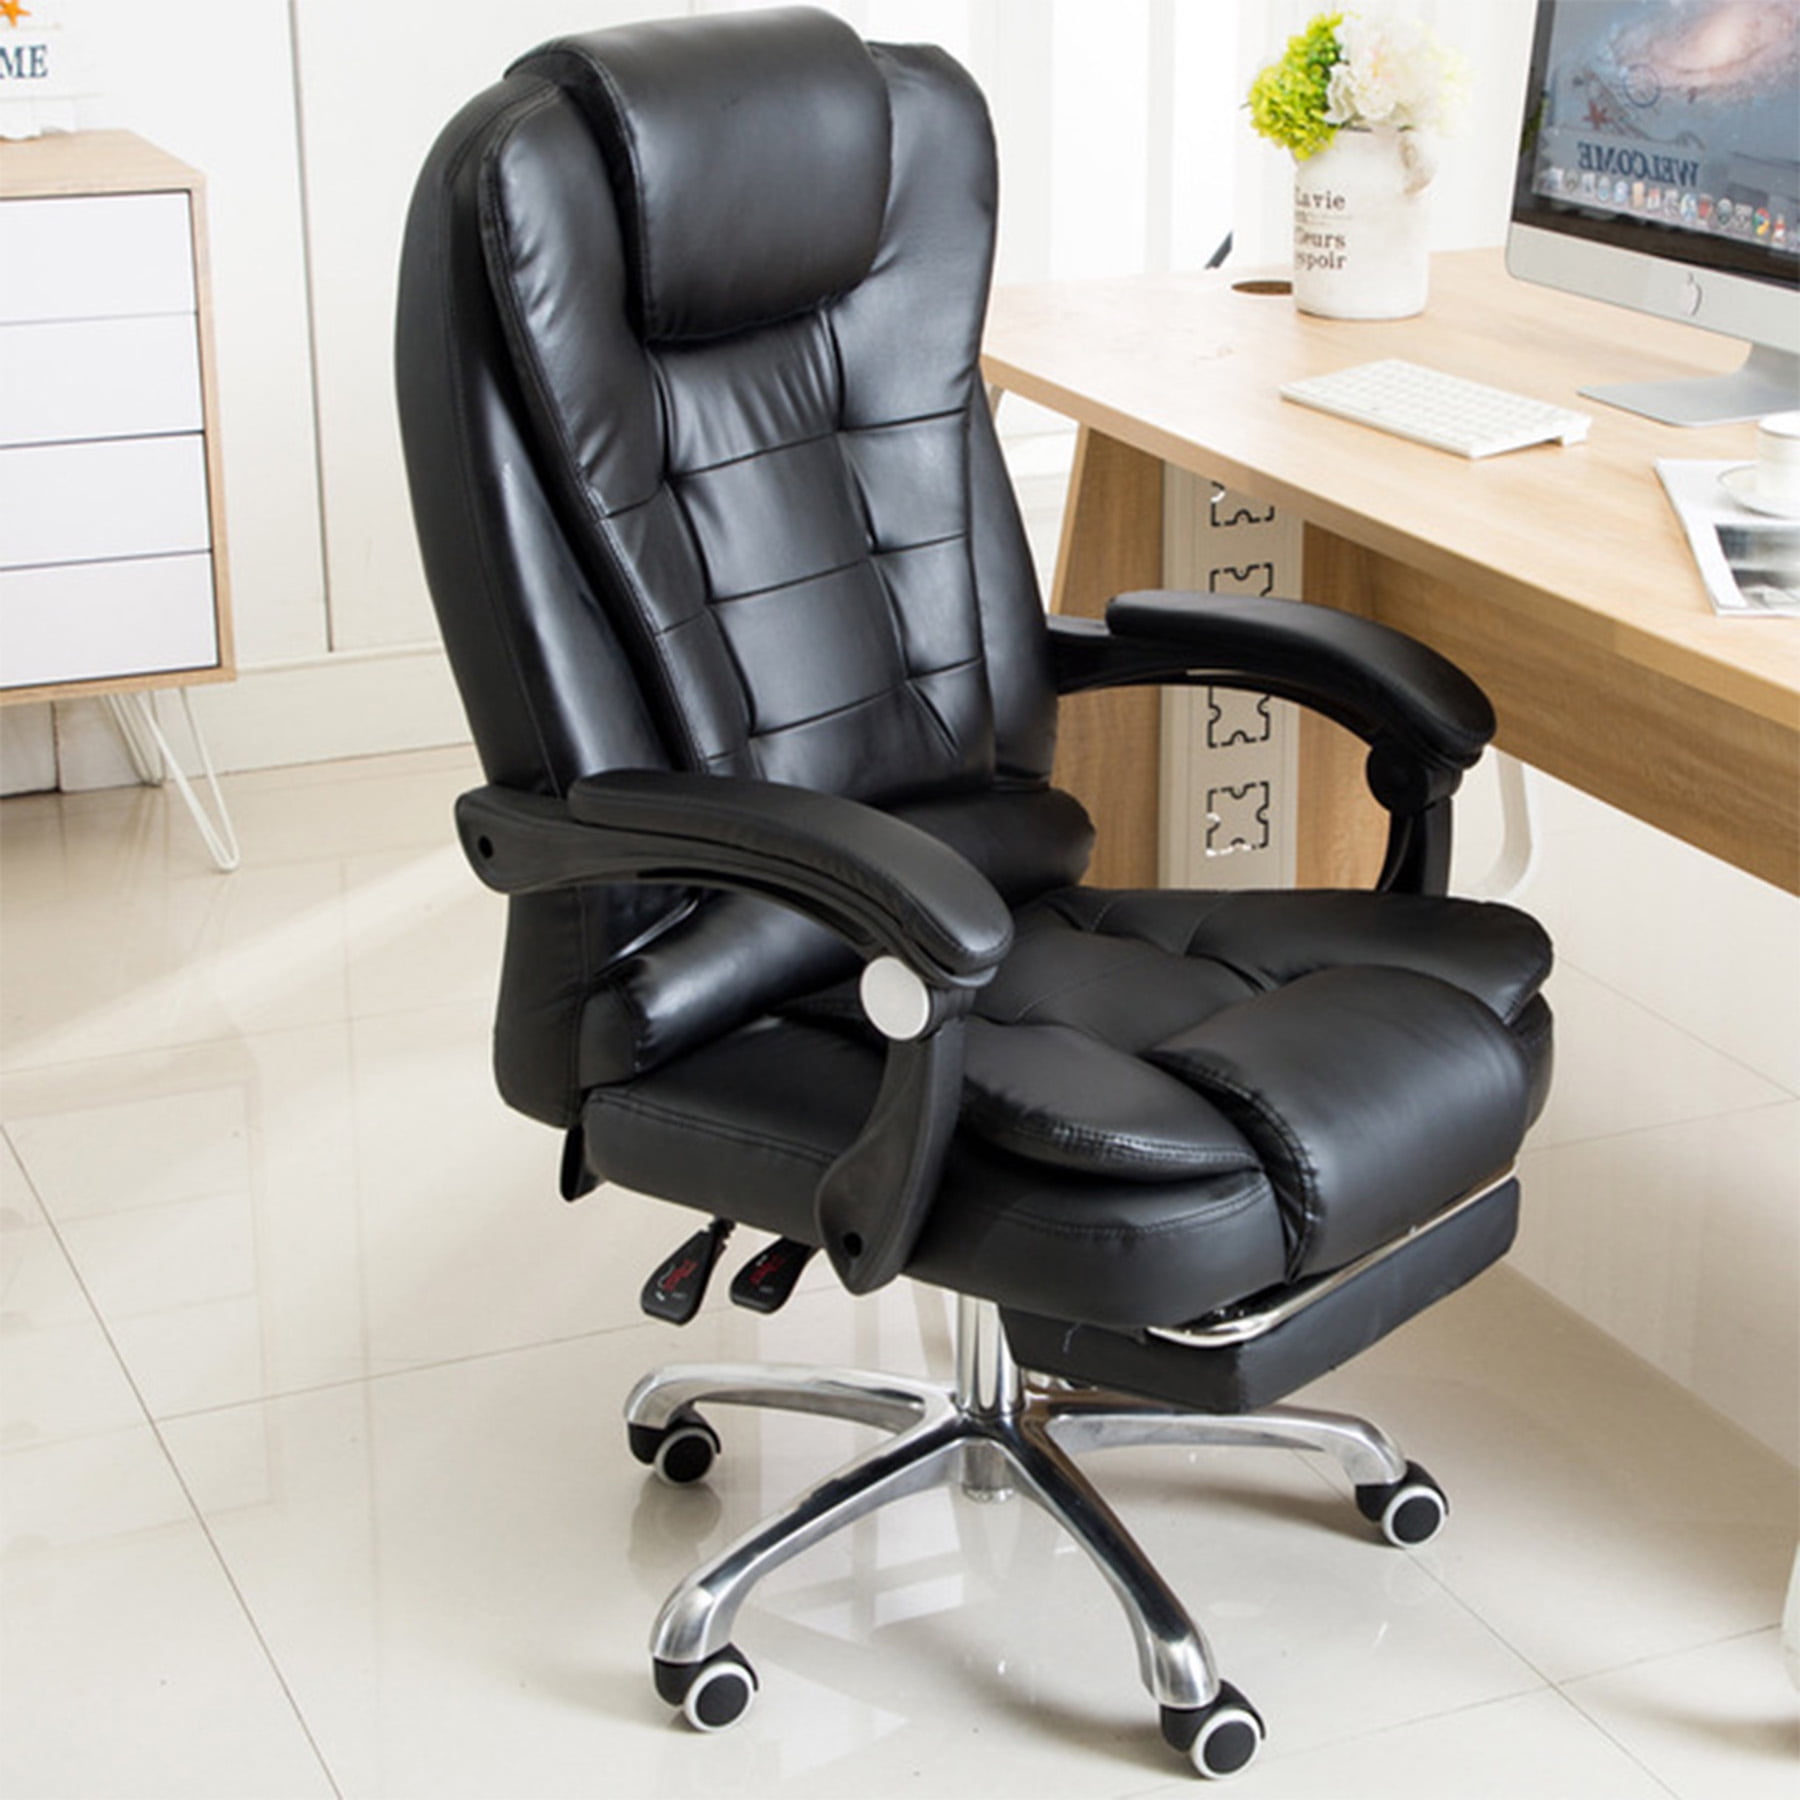 Executive Gaming Office Chair Swivel Leather Desk Seat Recliner Computer Chair 